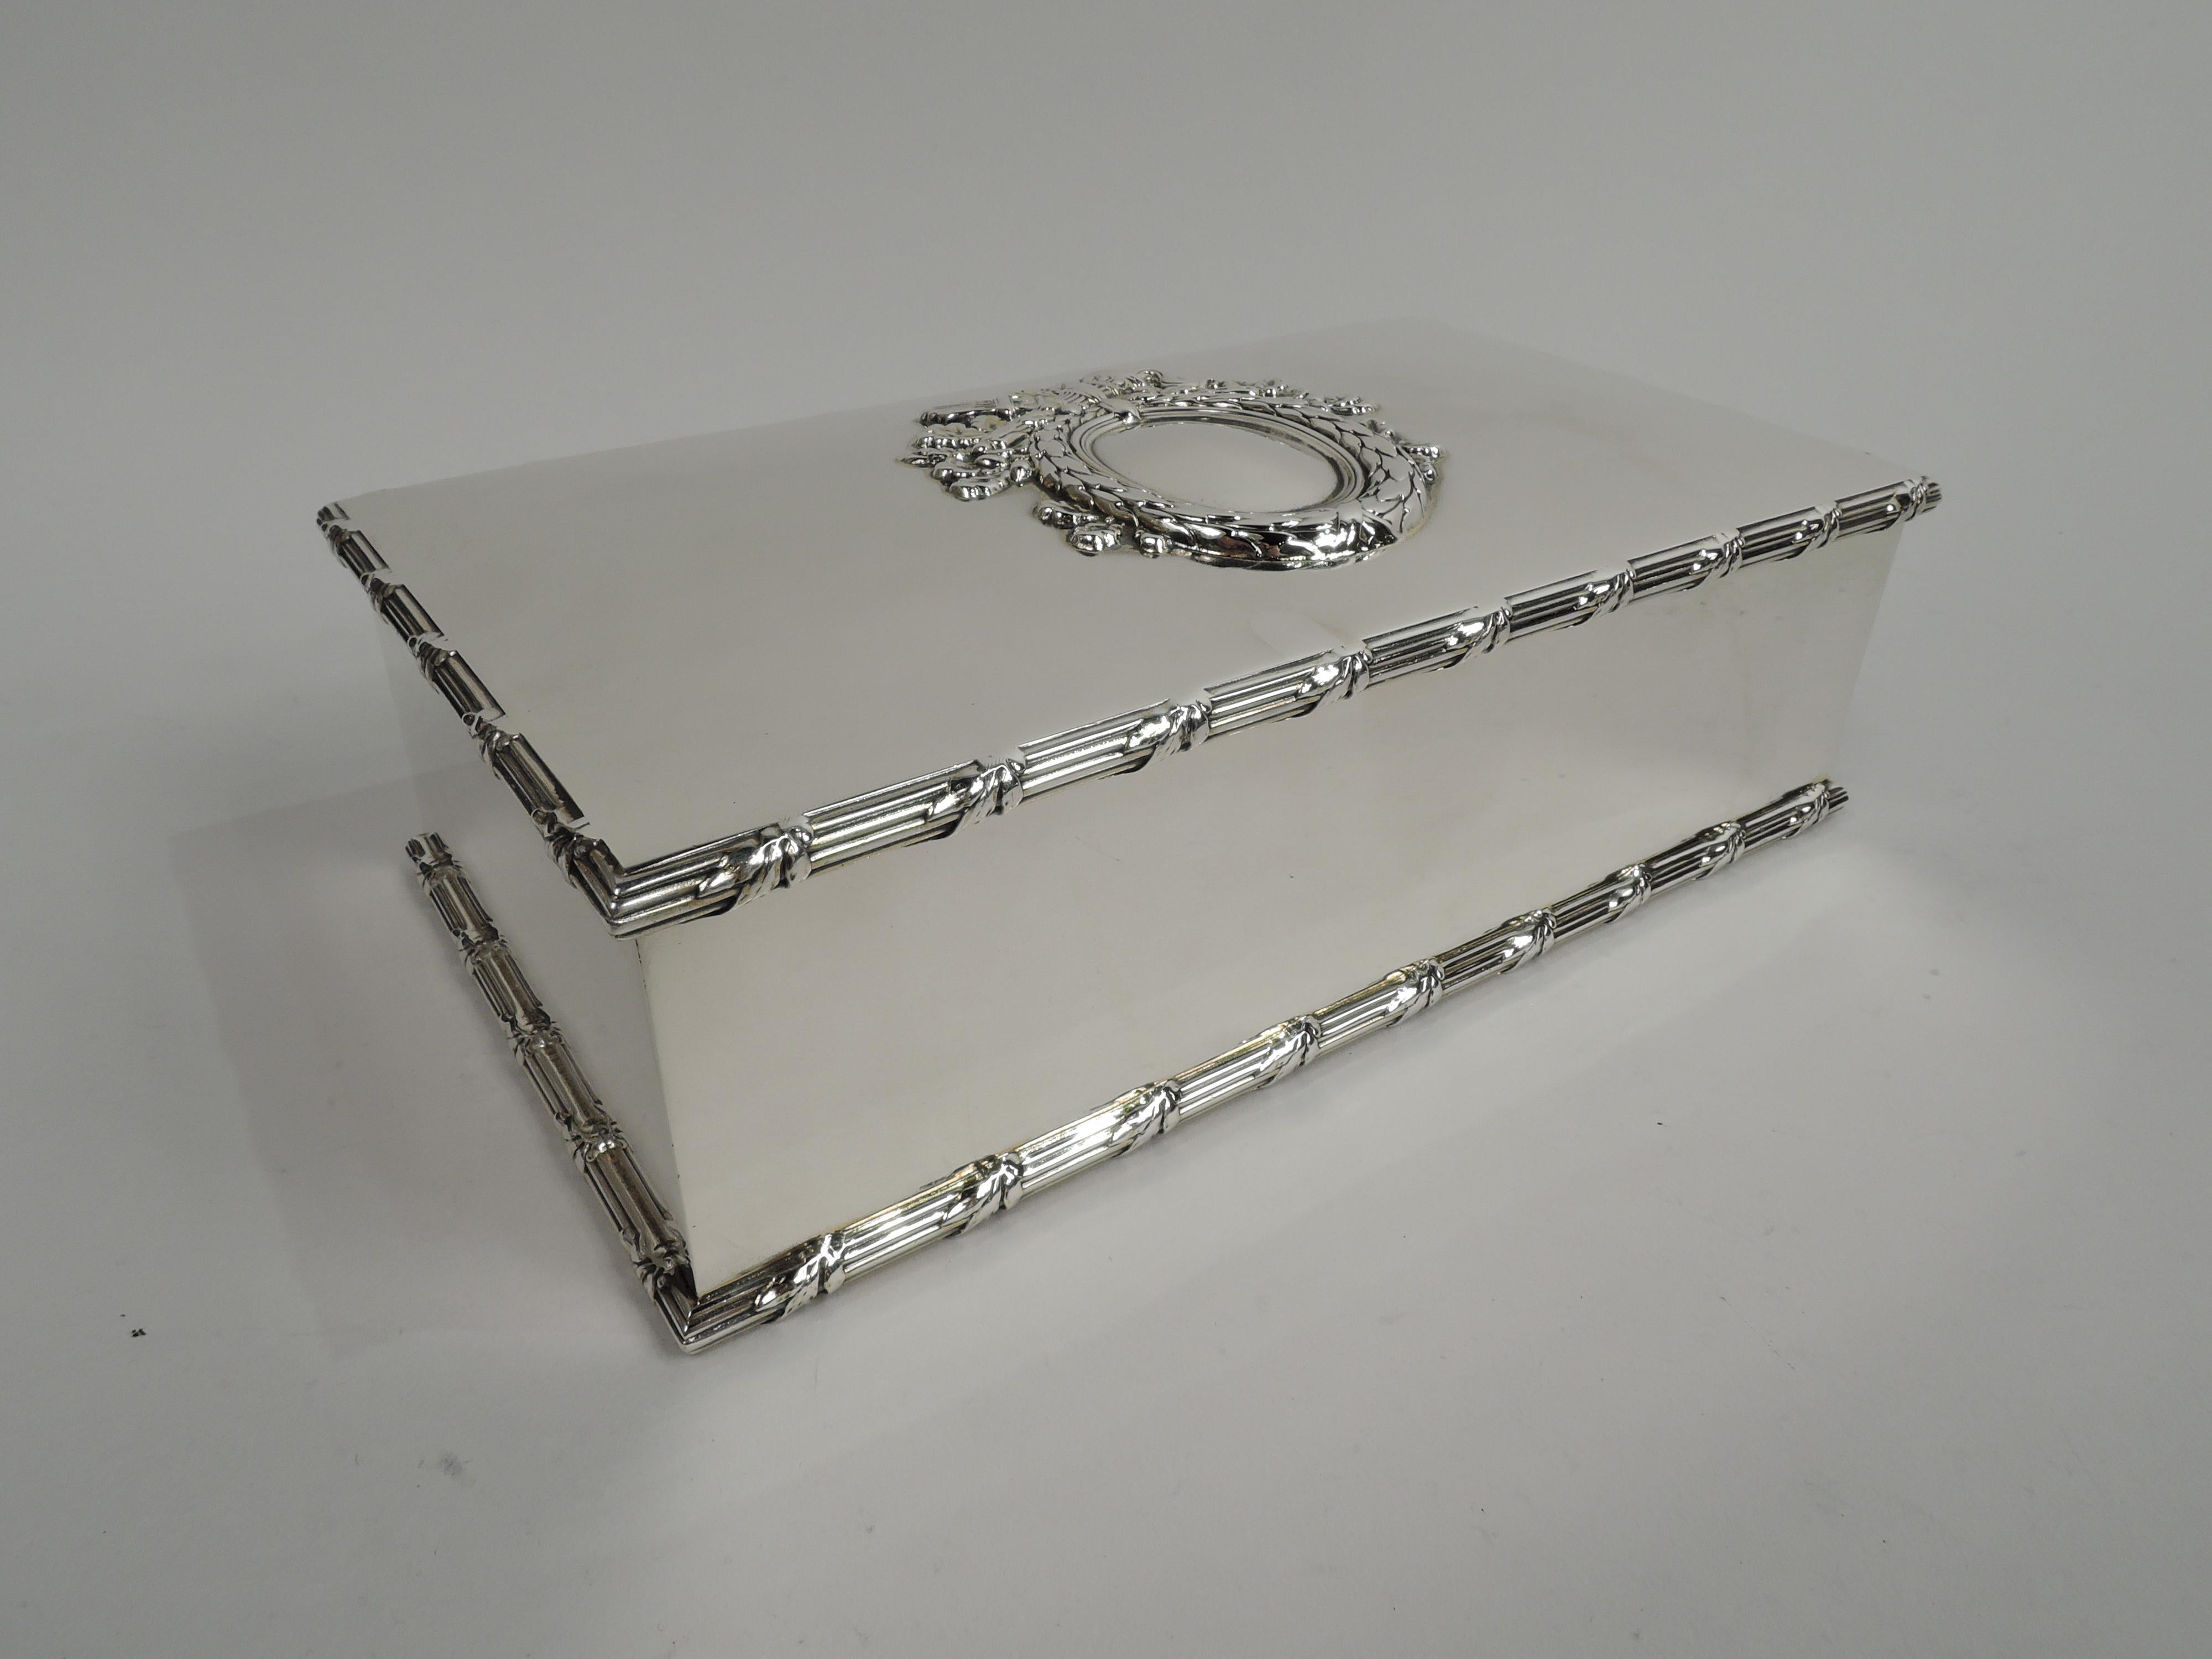 Large Edwardian Regency sterling silver keepsake box. Made by Howard & Co. in New York in 1900. Rectangular with straight sides and crisp corners. Cover hinged; top has centrally applied imbricated-leaf oval frame (vacant) with surrounded by